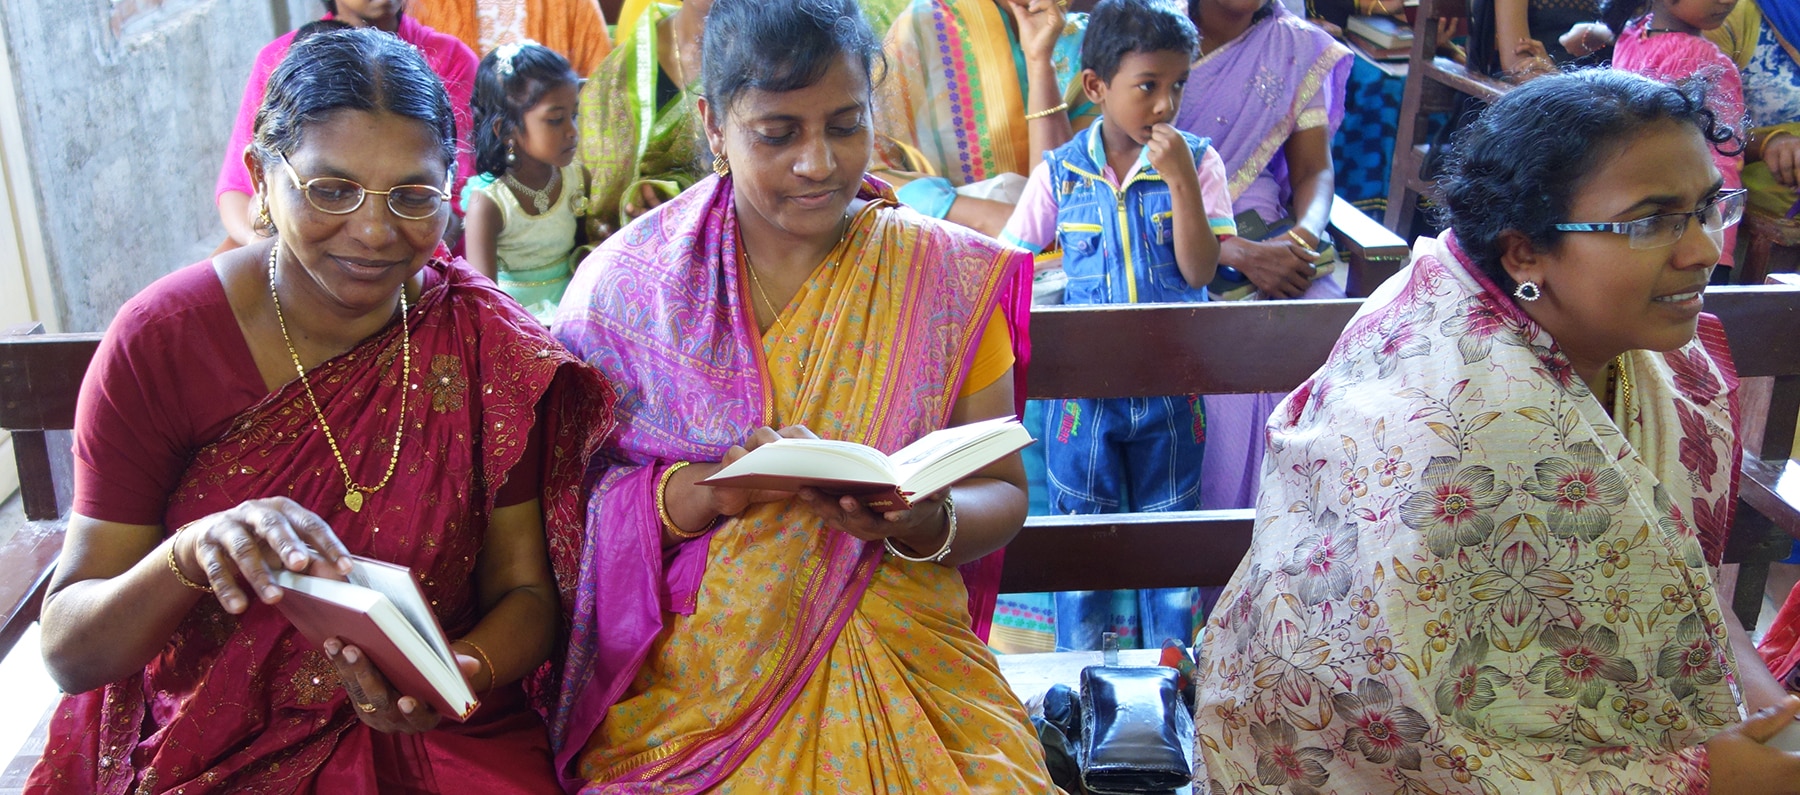 India Women Reading Catechisms